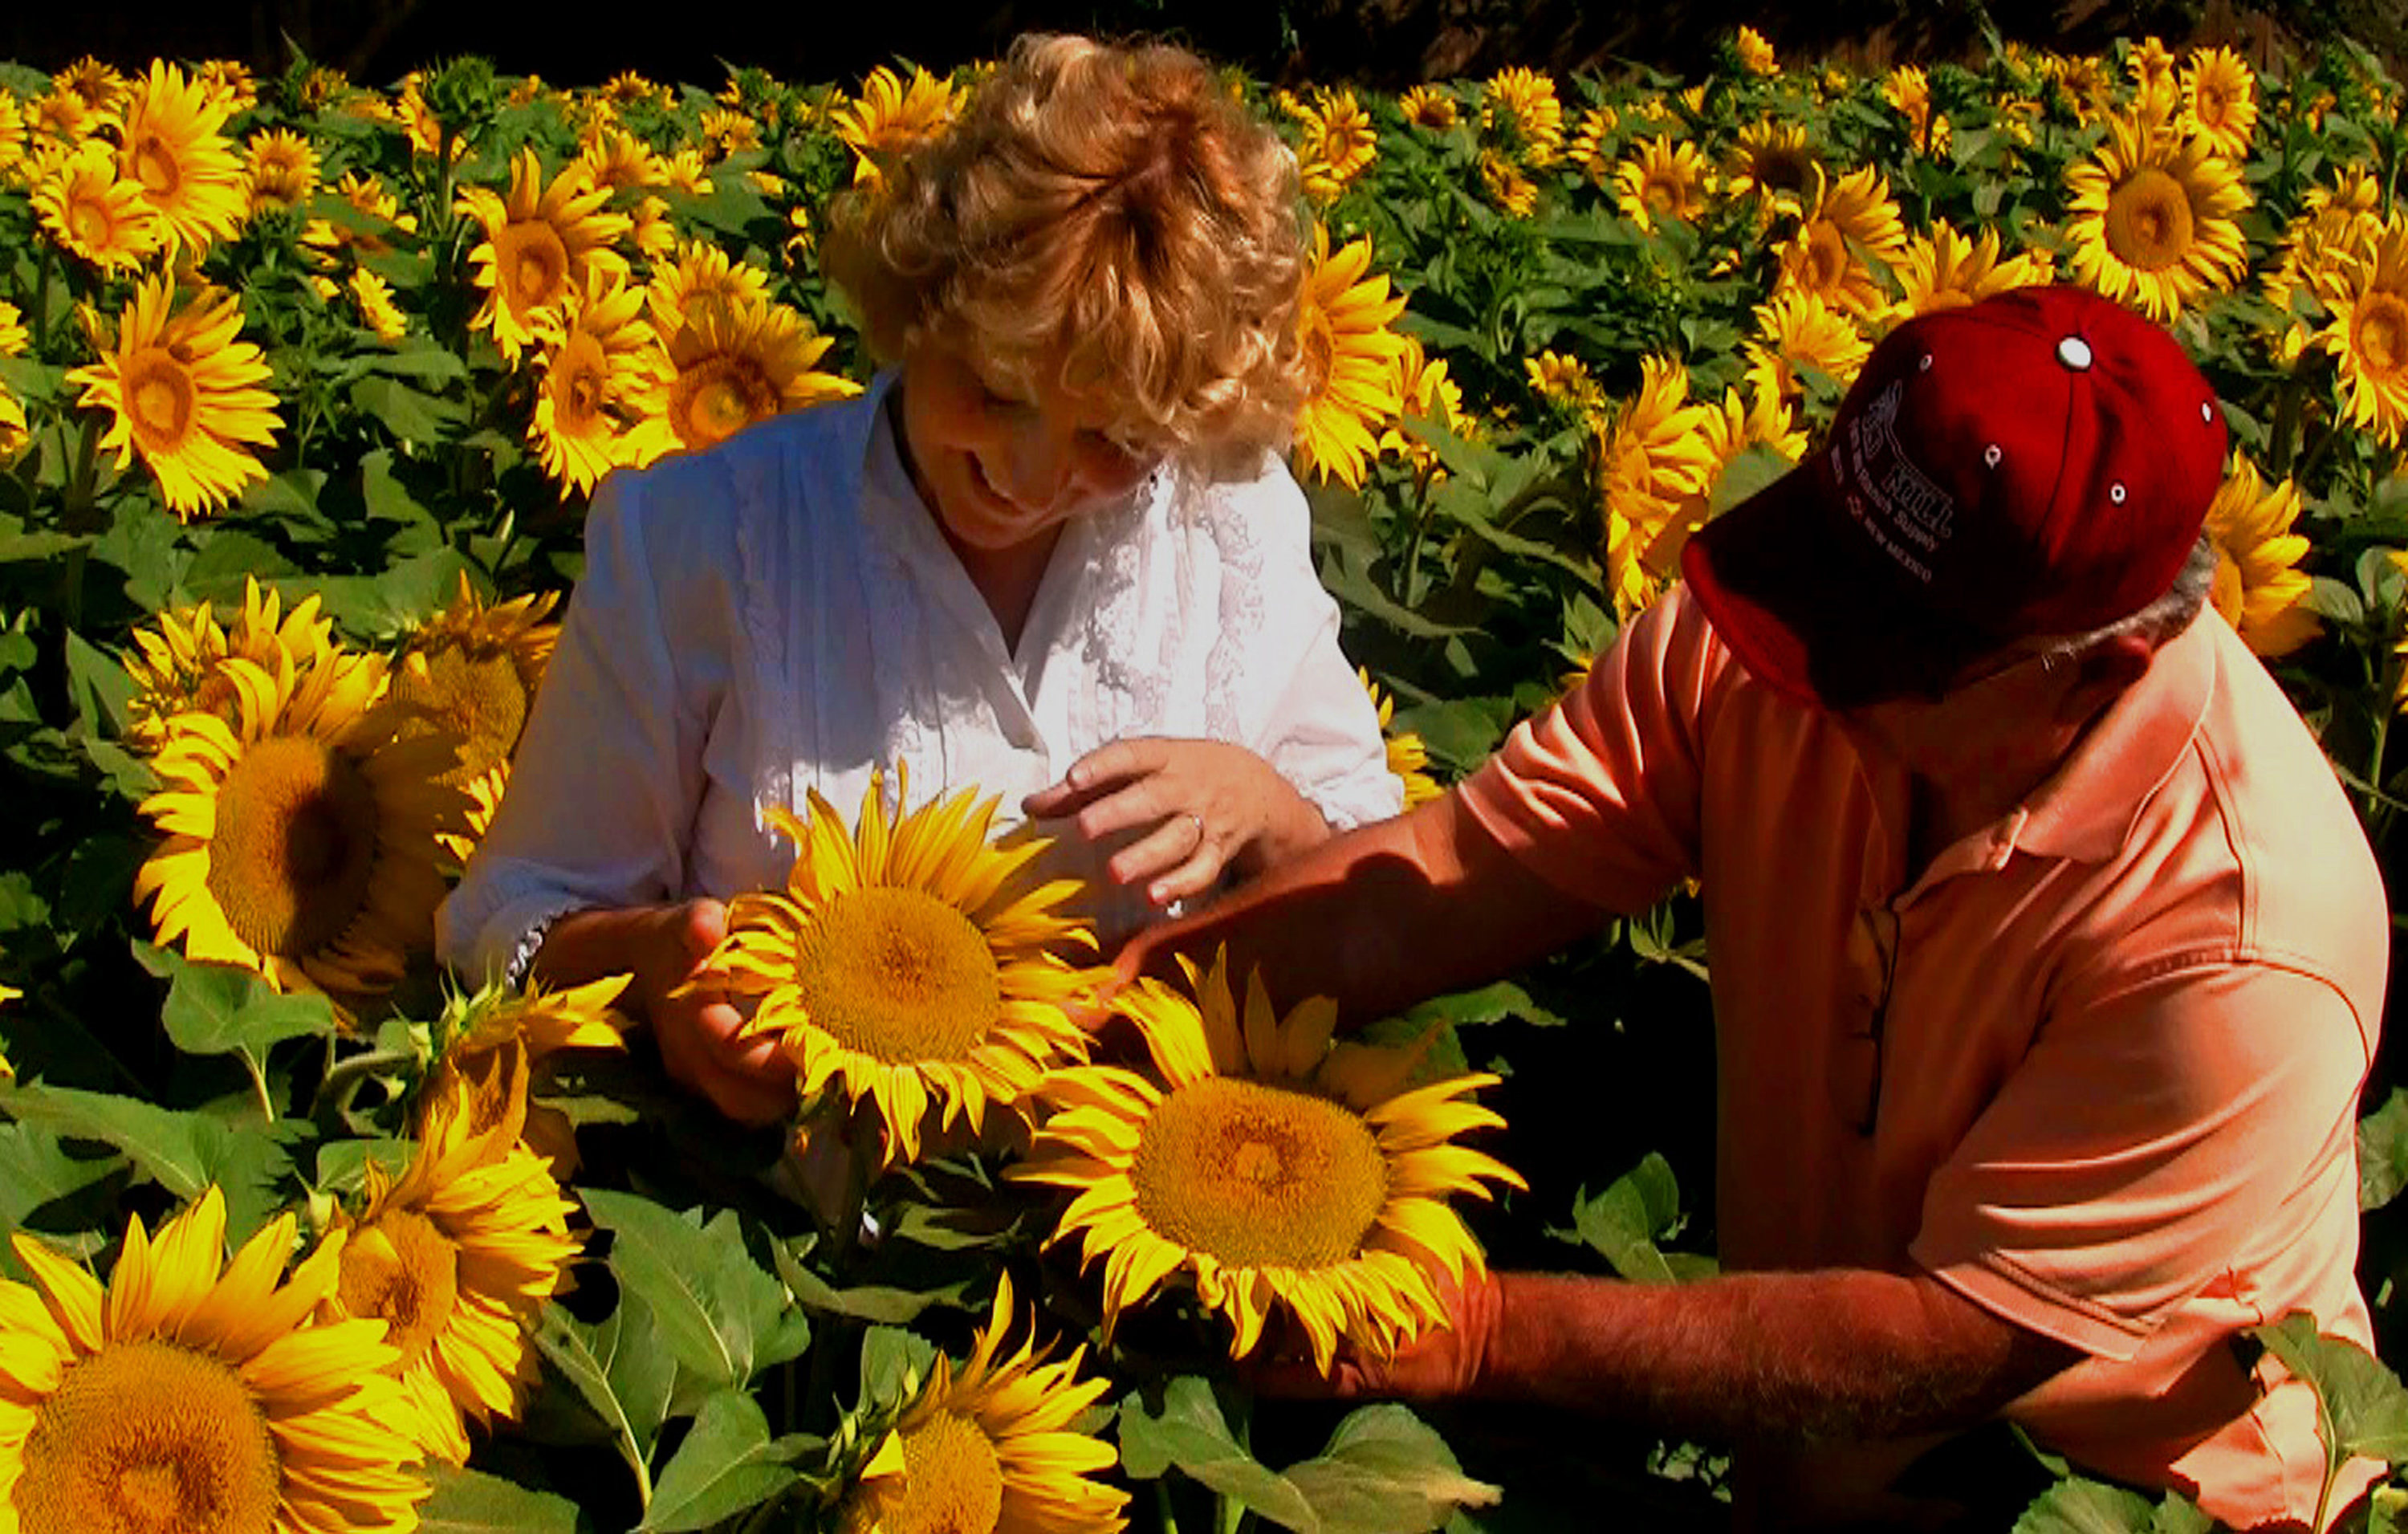 man and woman in sunflower field